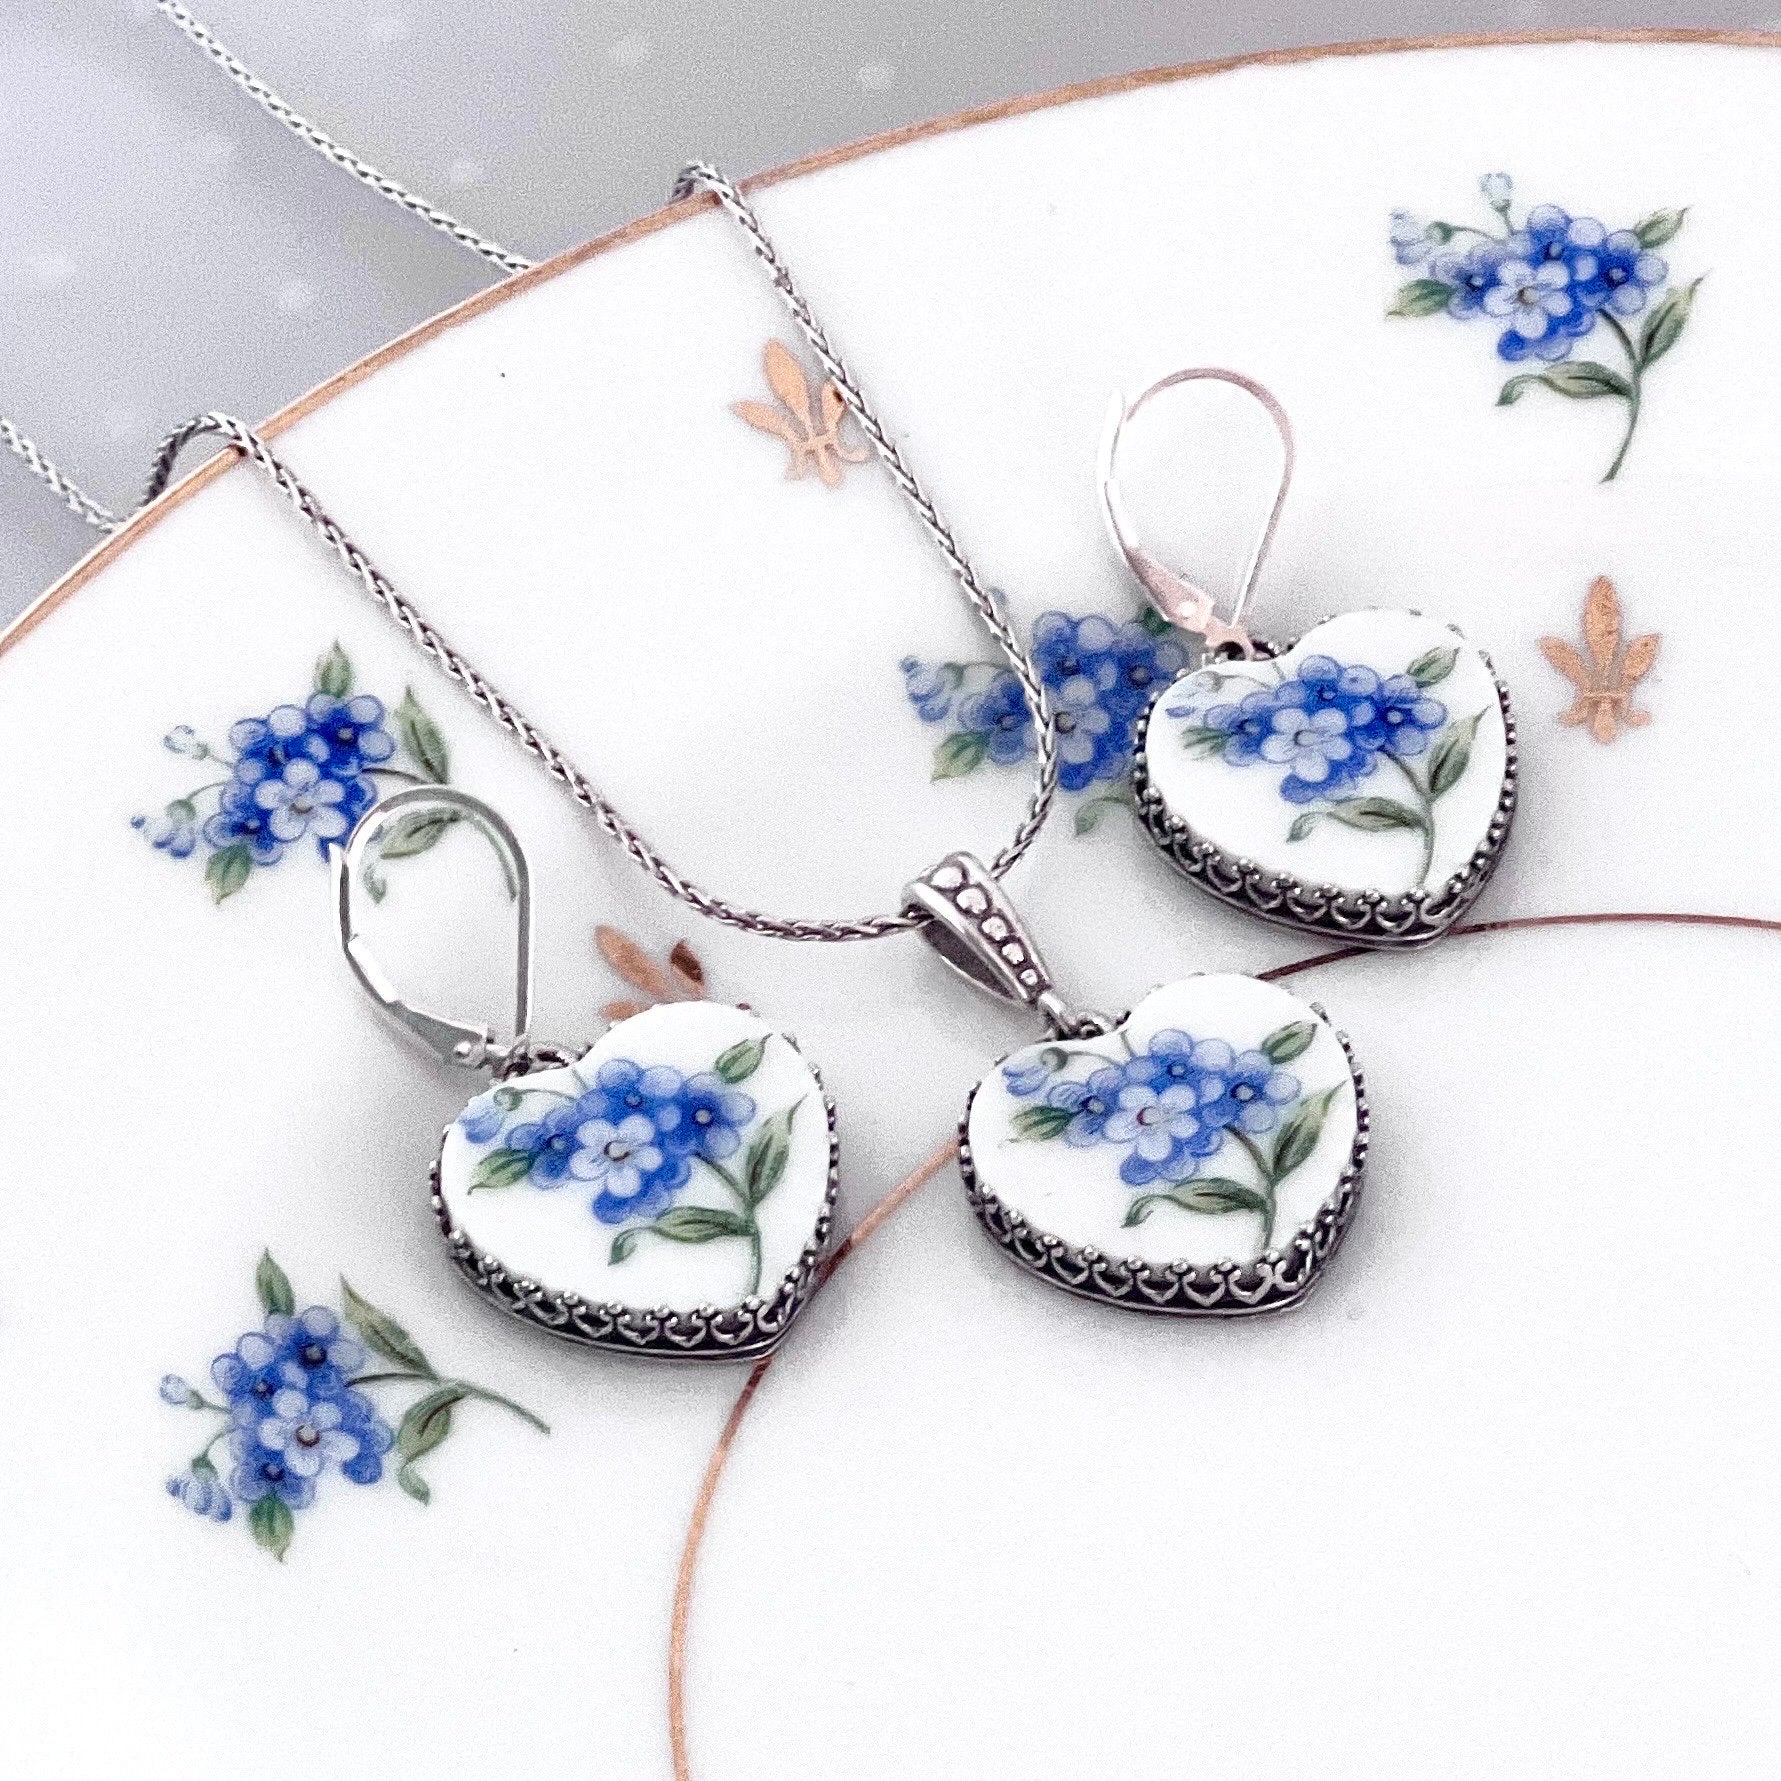 CUSTOM ORDER Dainty Heart China Jewelry Set, 20th Anniversary China Gift for Wife, Made From Your Broken China Jewelry, Custom Jewelry